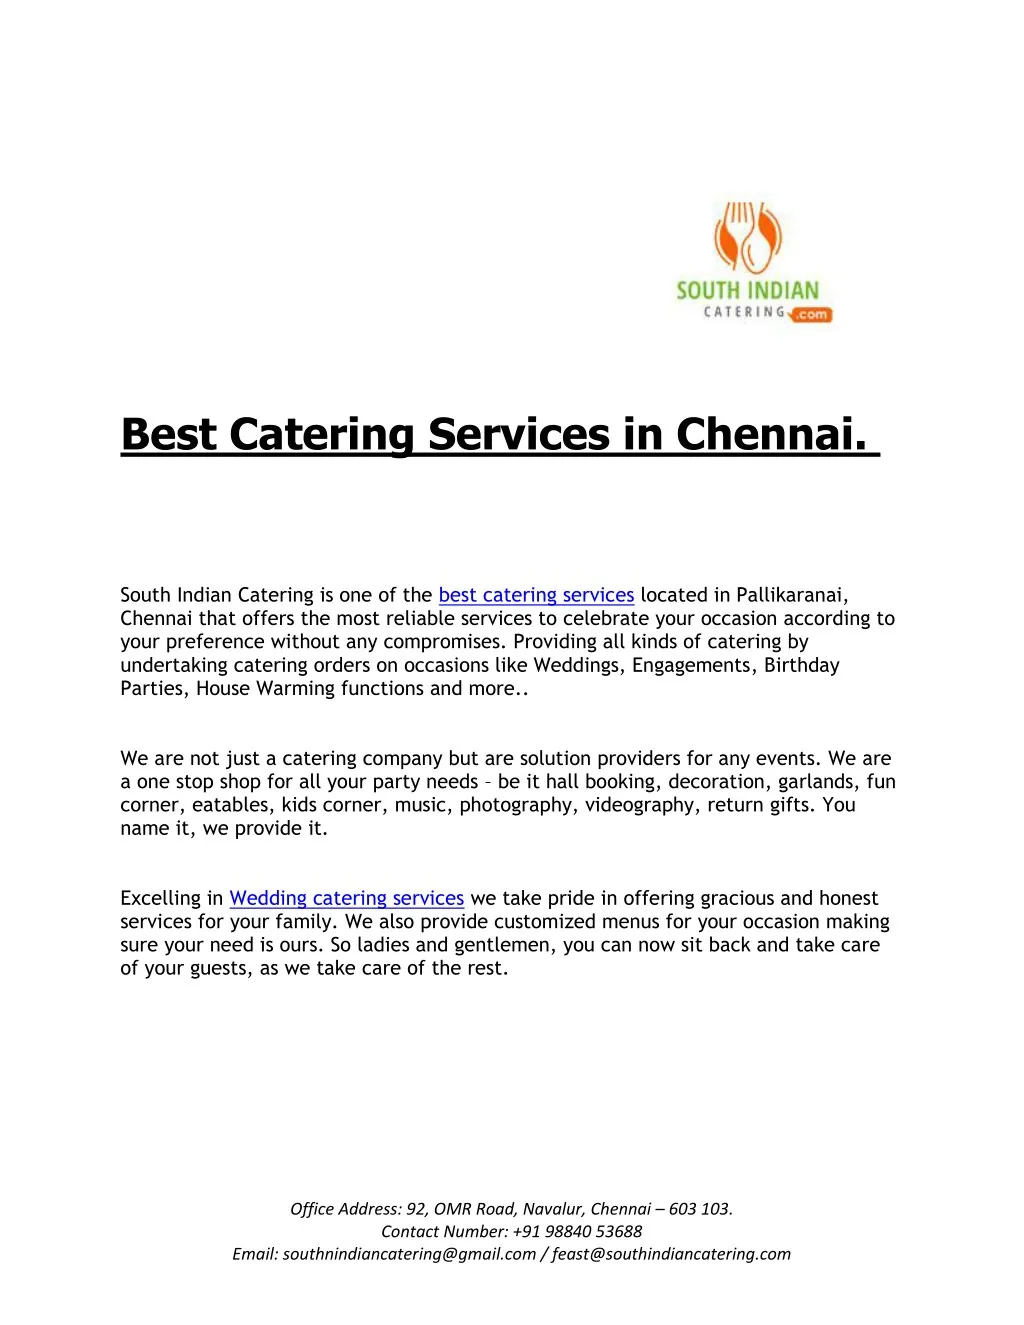 best catering services in chennai south indian